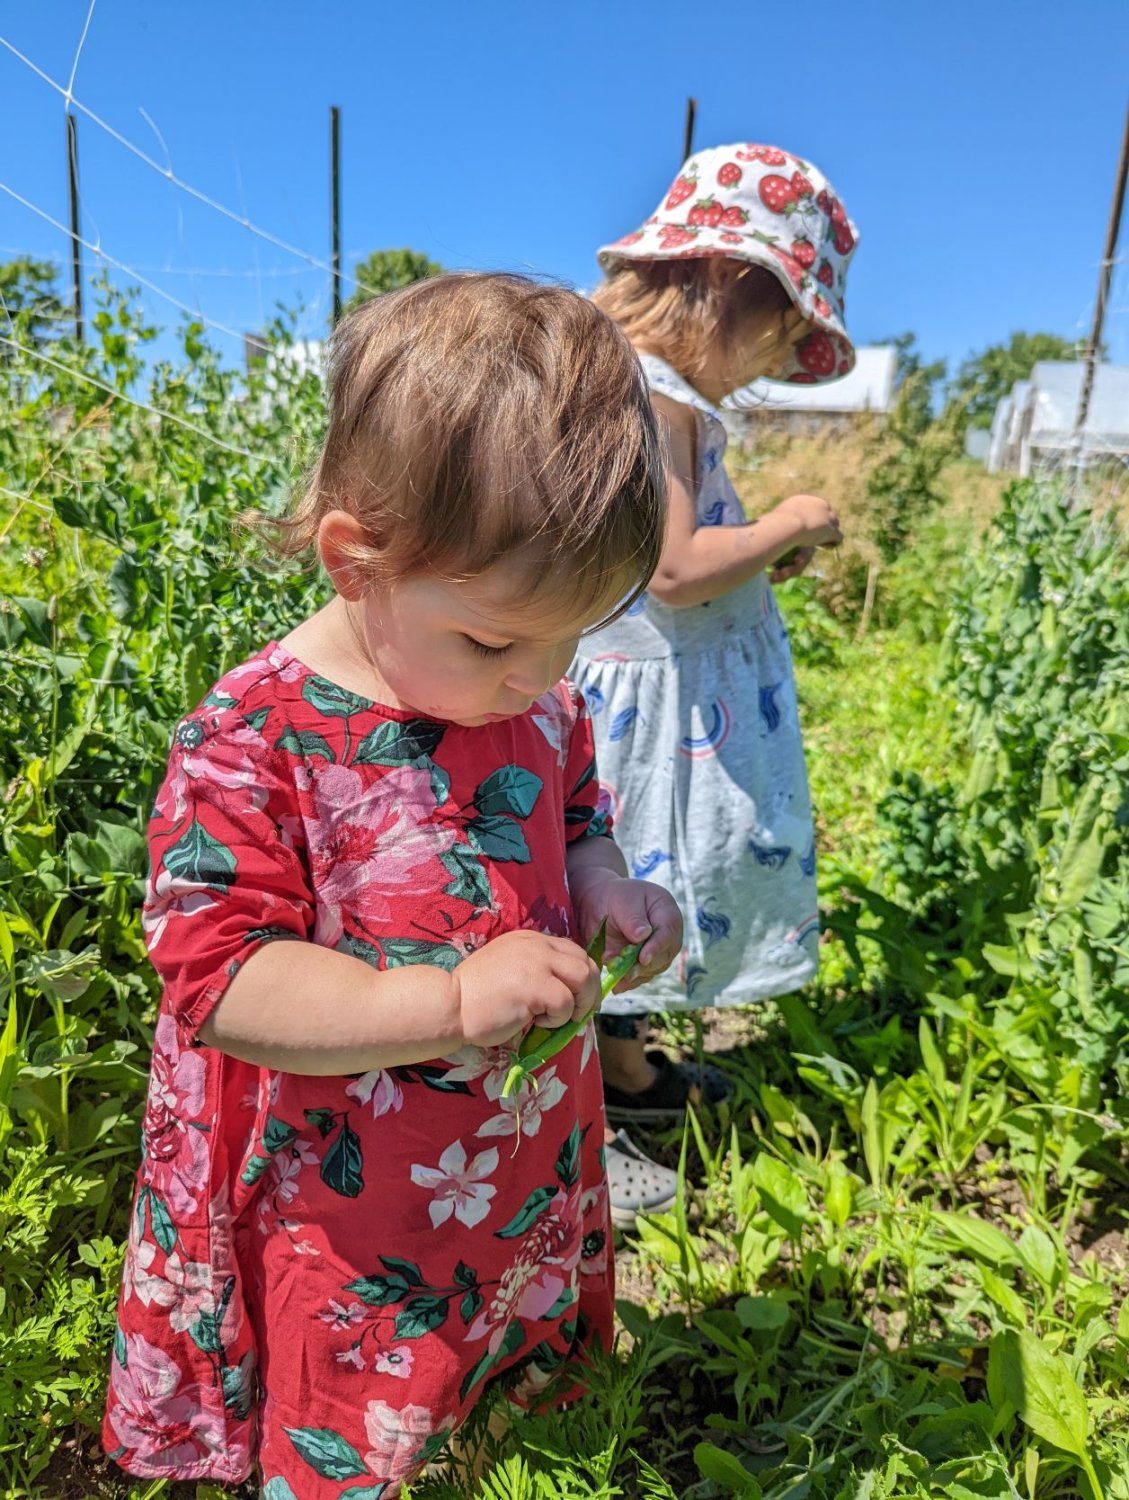 Next Happening: 2022 Farm Share Week 4 - Welcome Summer